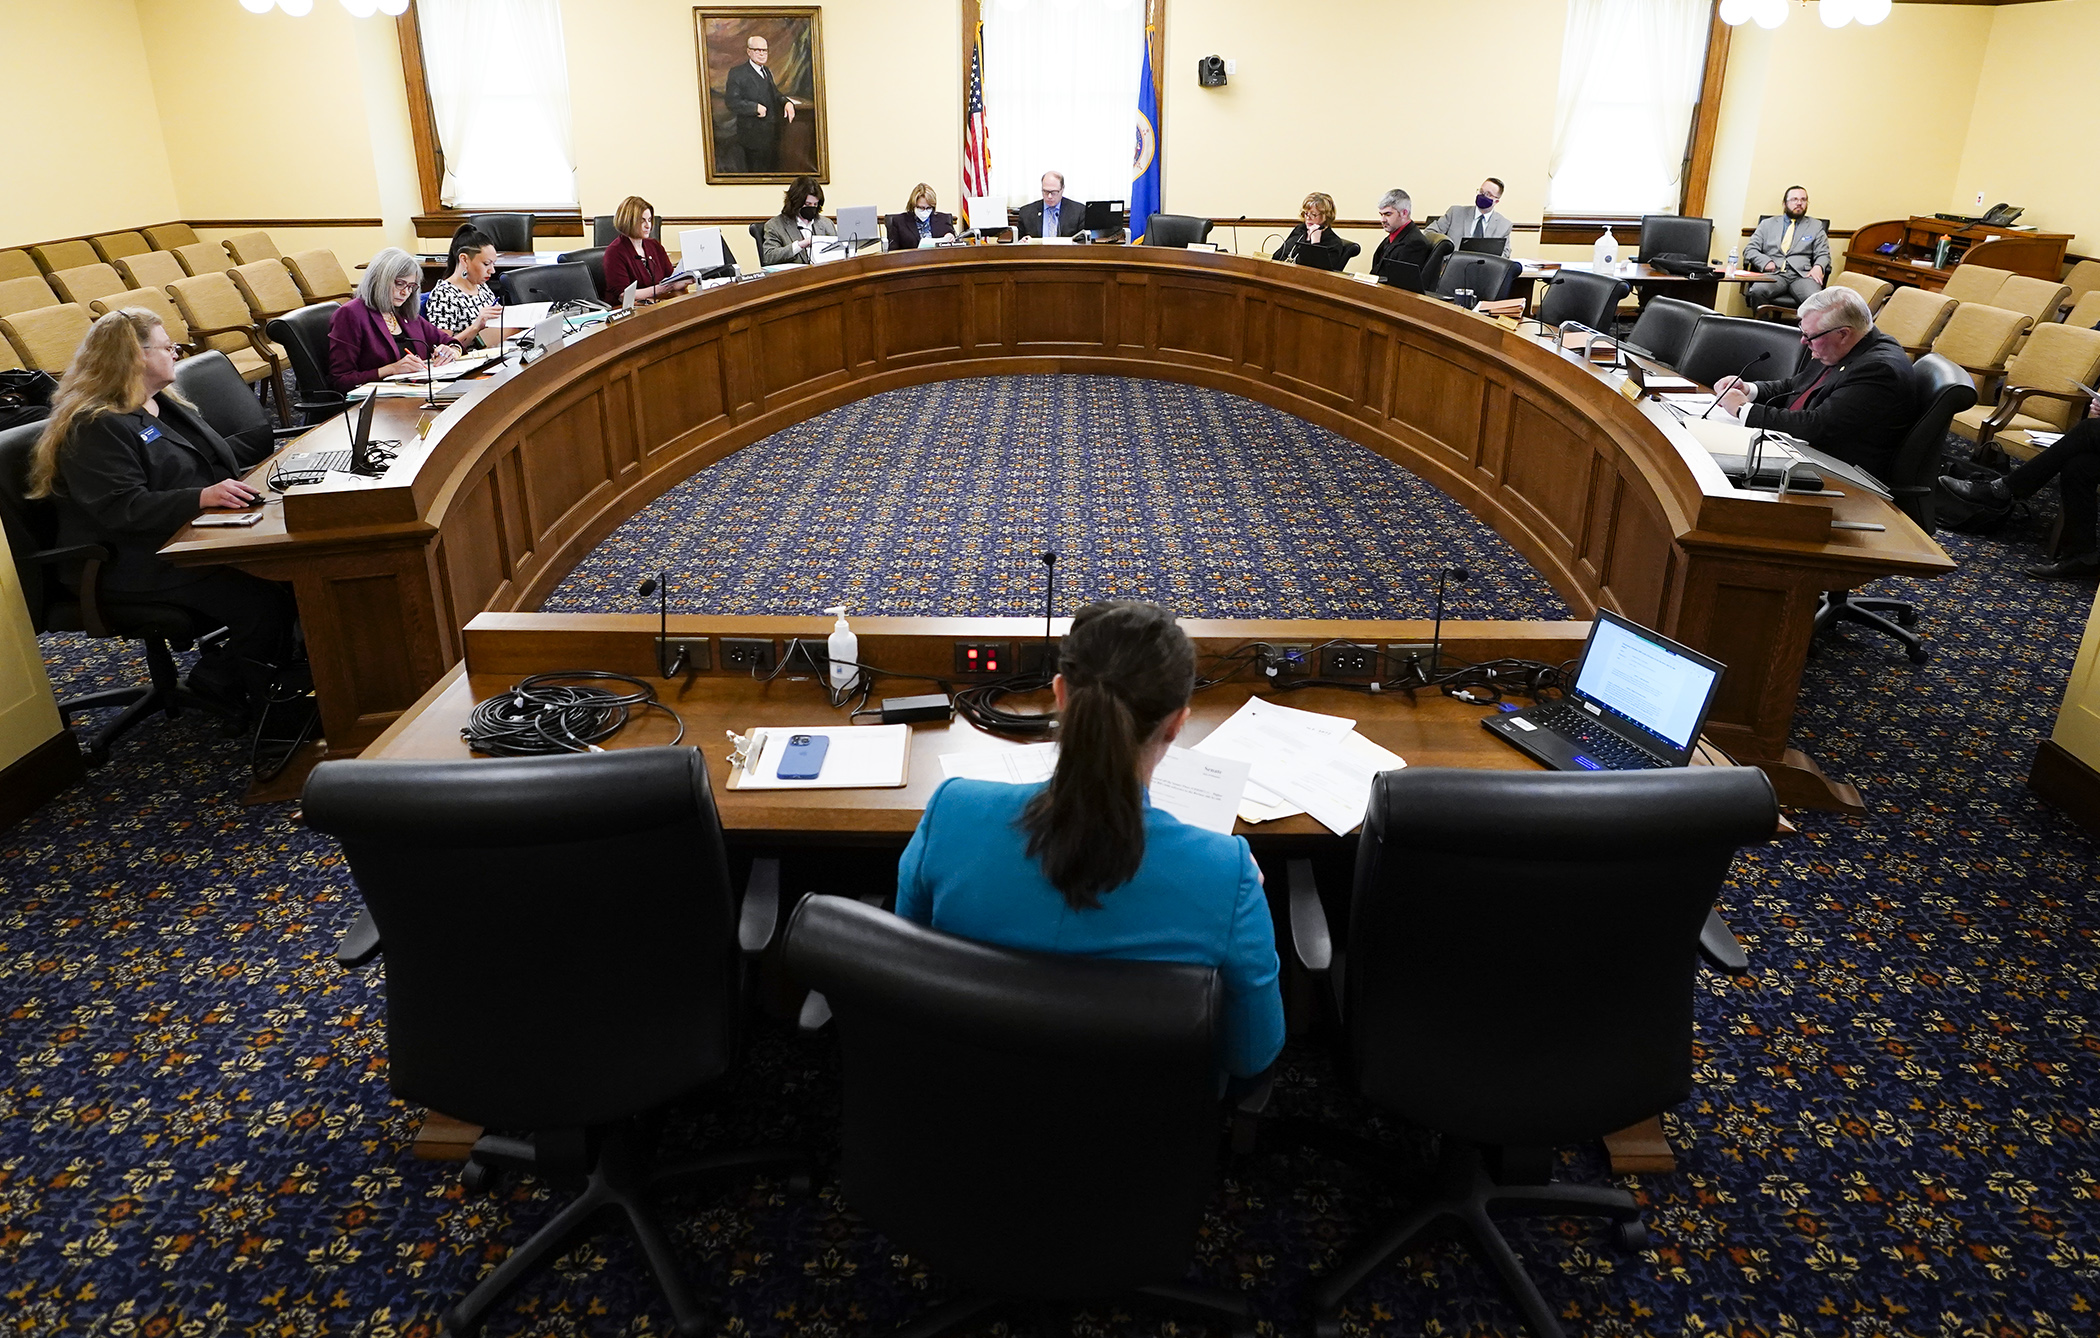 Members of the conference committee listen as staff does a side-by-side comparison of the House and Senate higher education omnibus bills during their first meeting May 11. (Photo by Paul Battaglia)